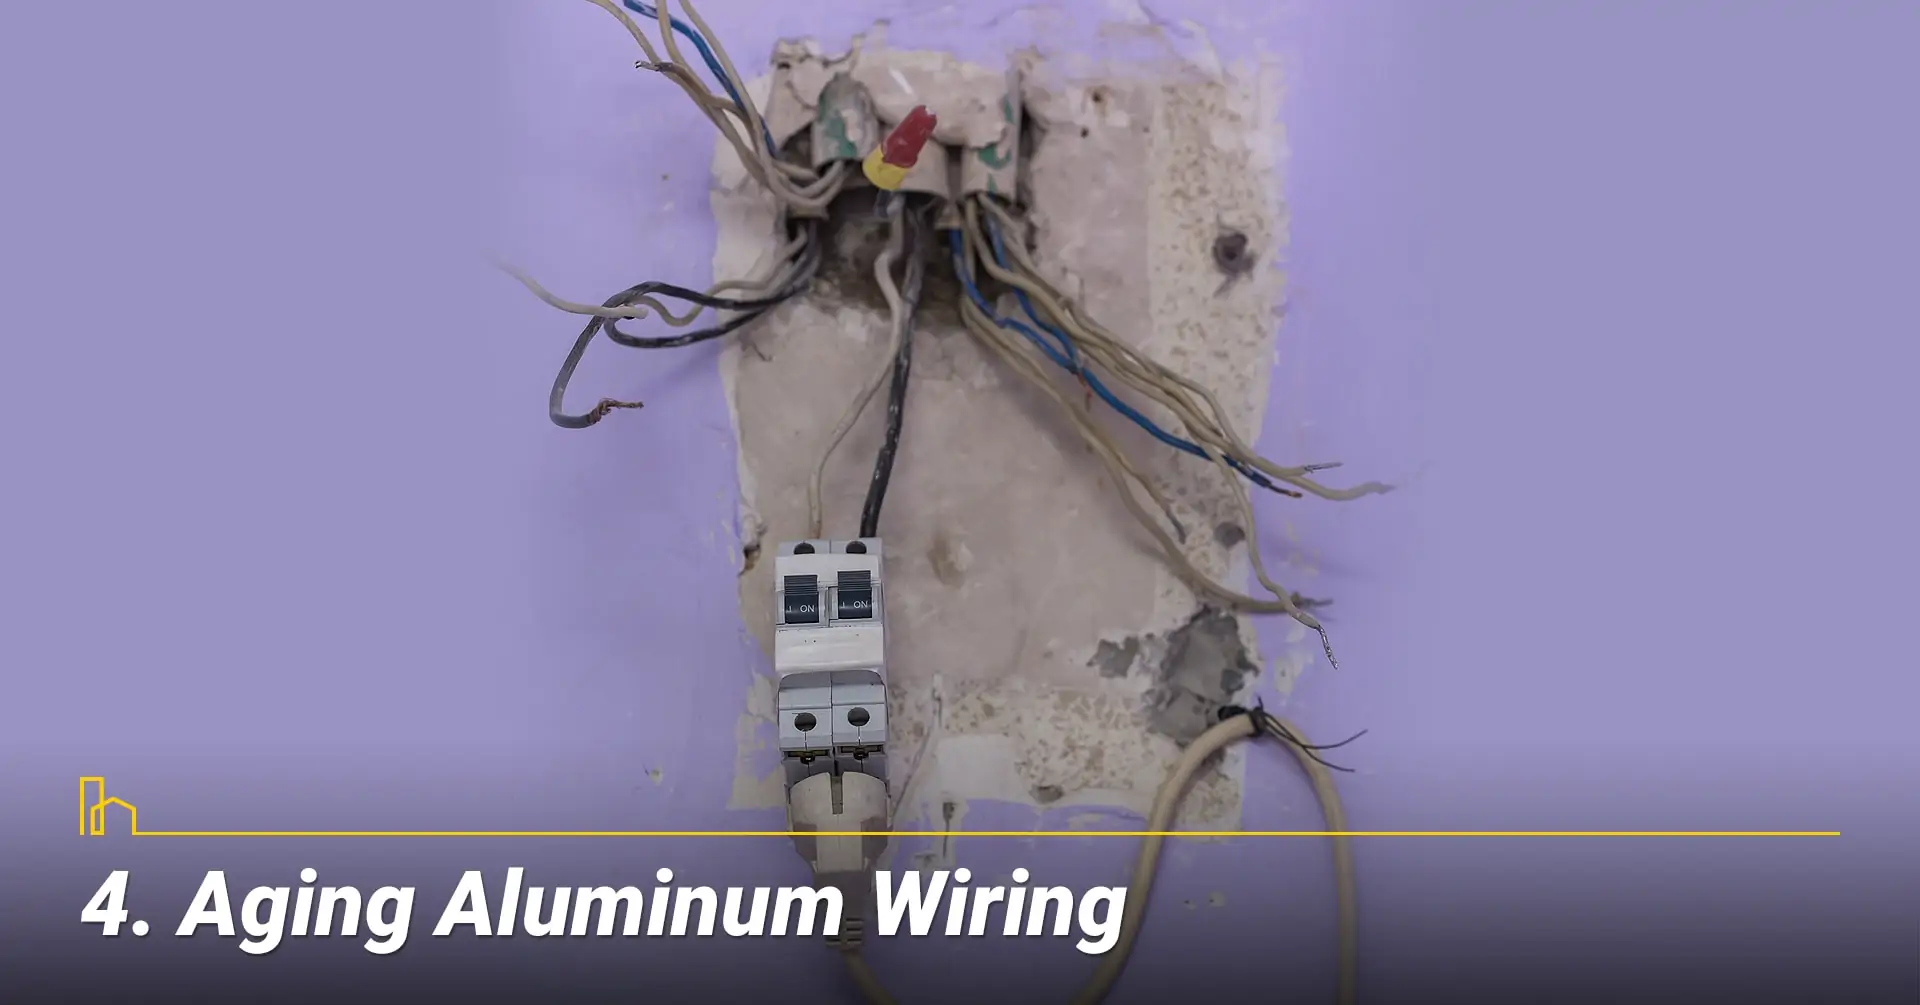 Aging Aluminum Wiring, old wires